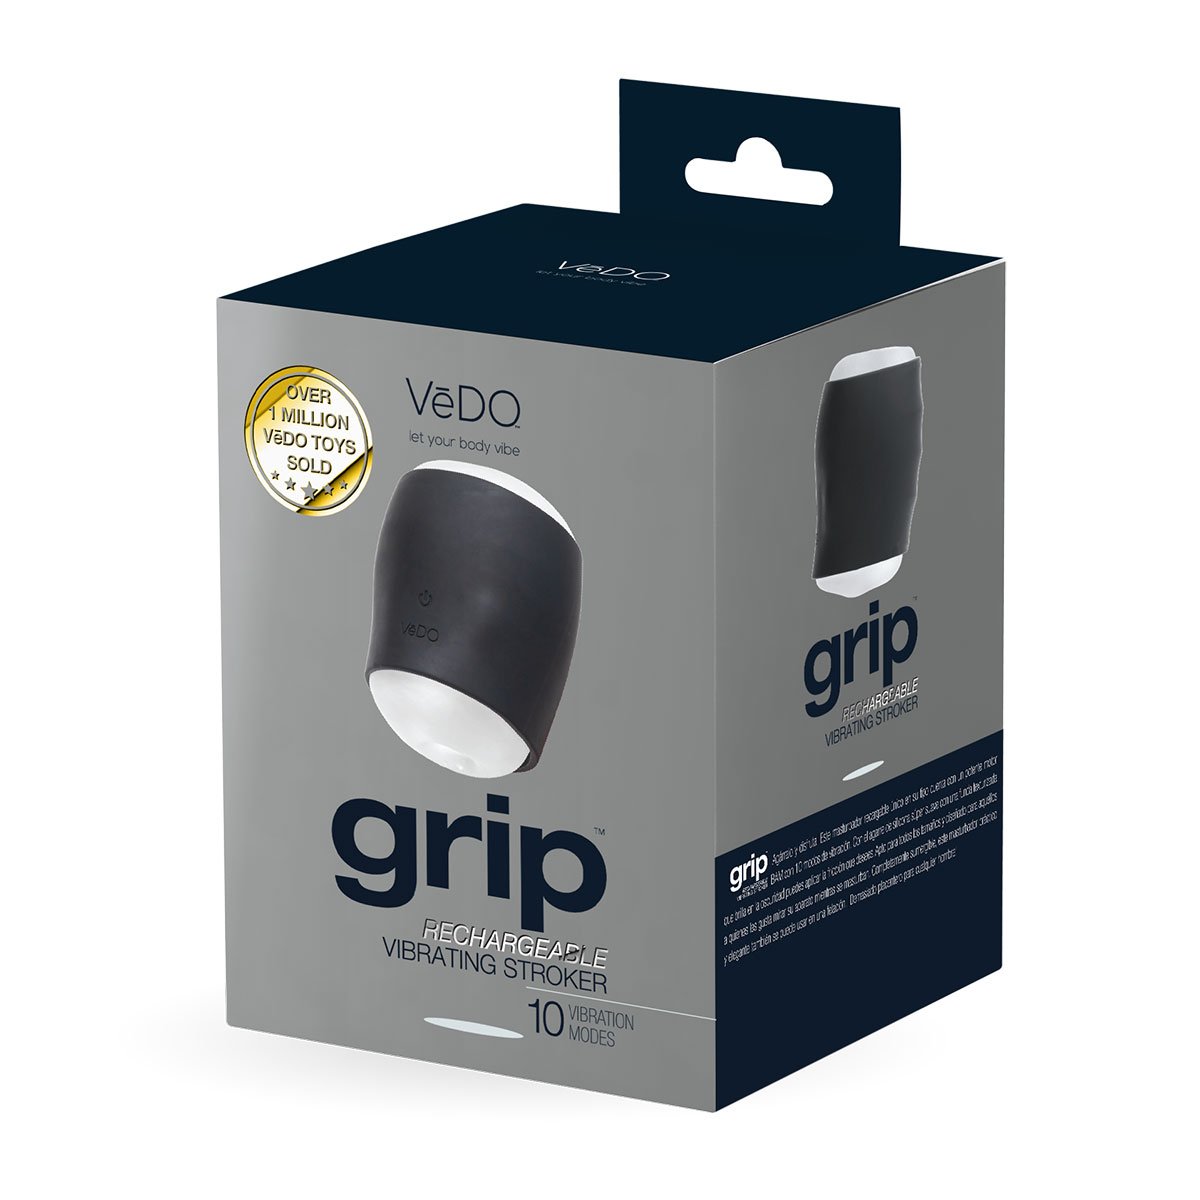 VeDO GRIP - Buy At Luxury Toy X - Free 3-Day Shipping